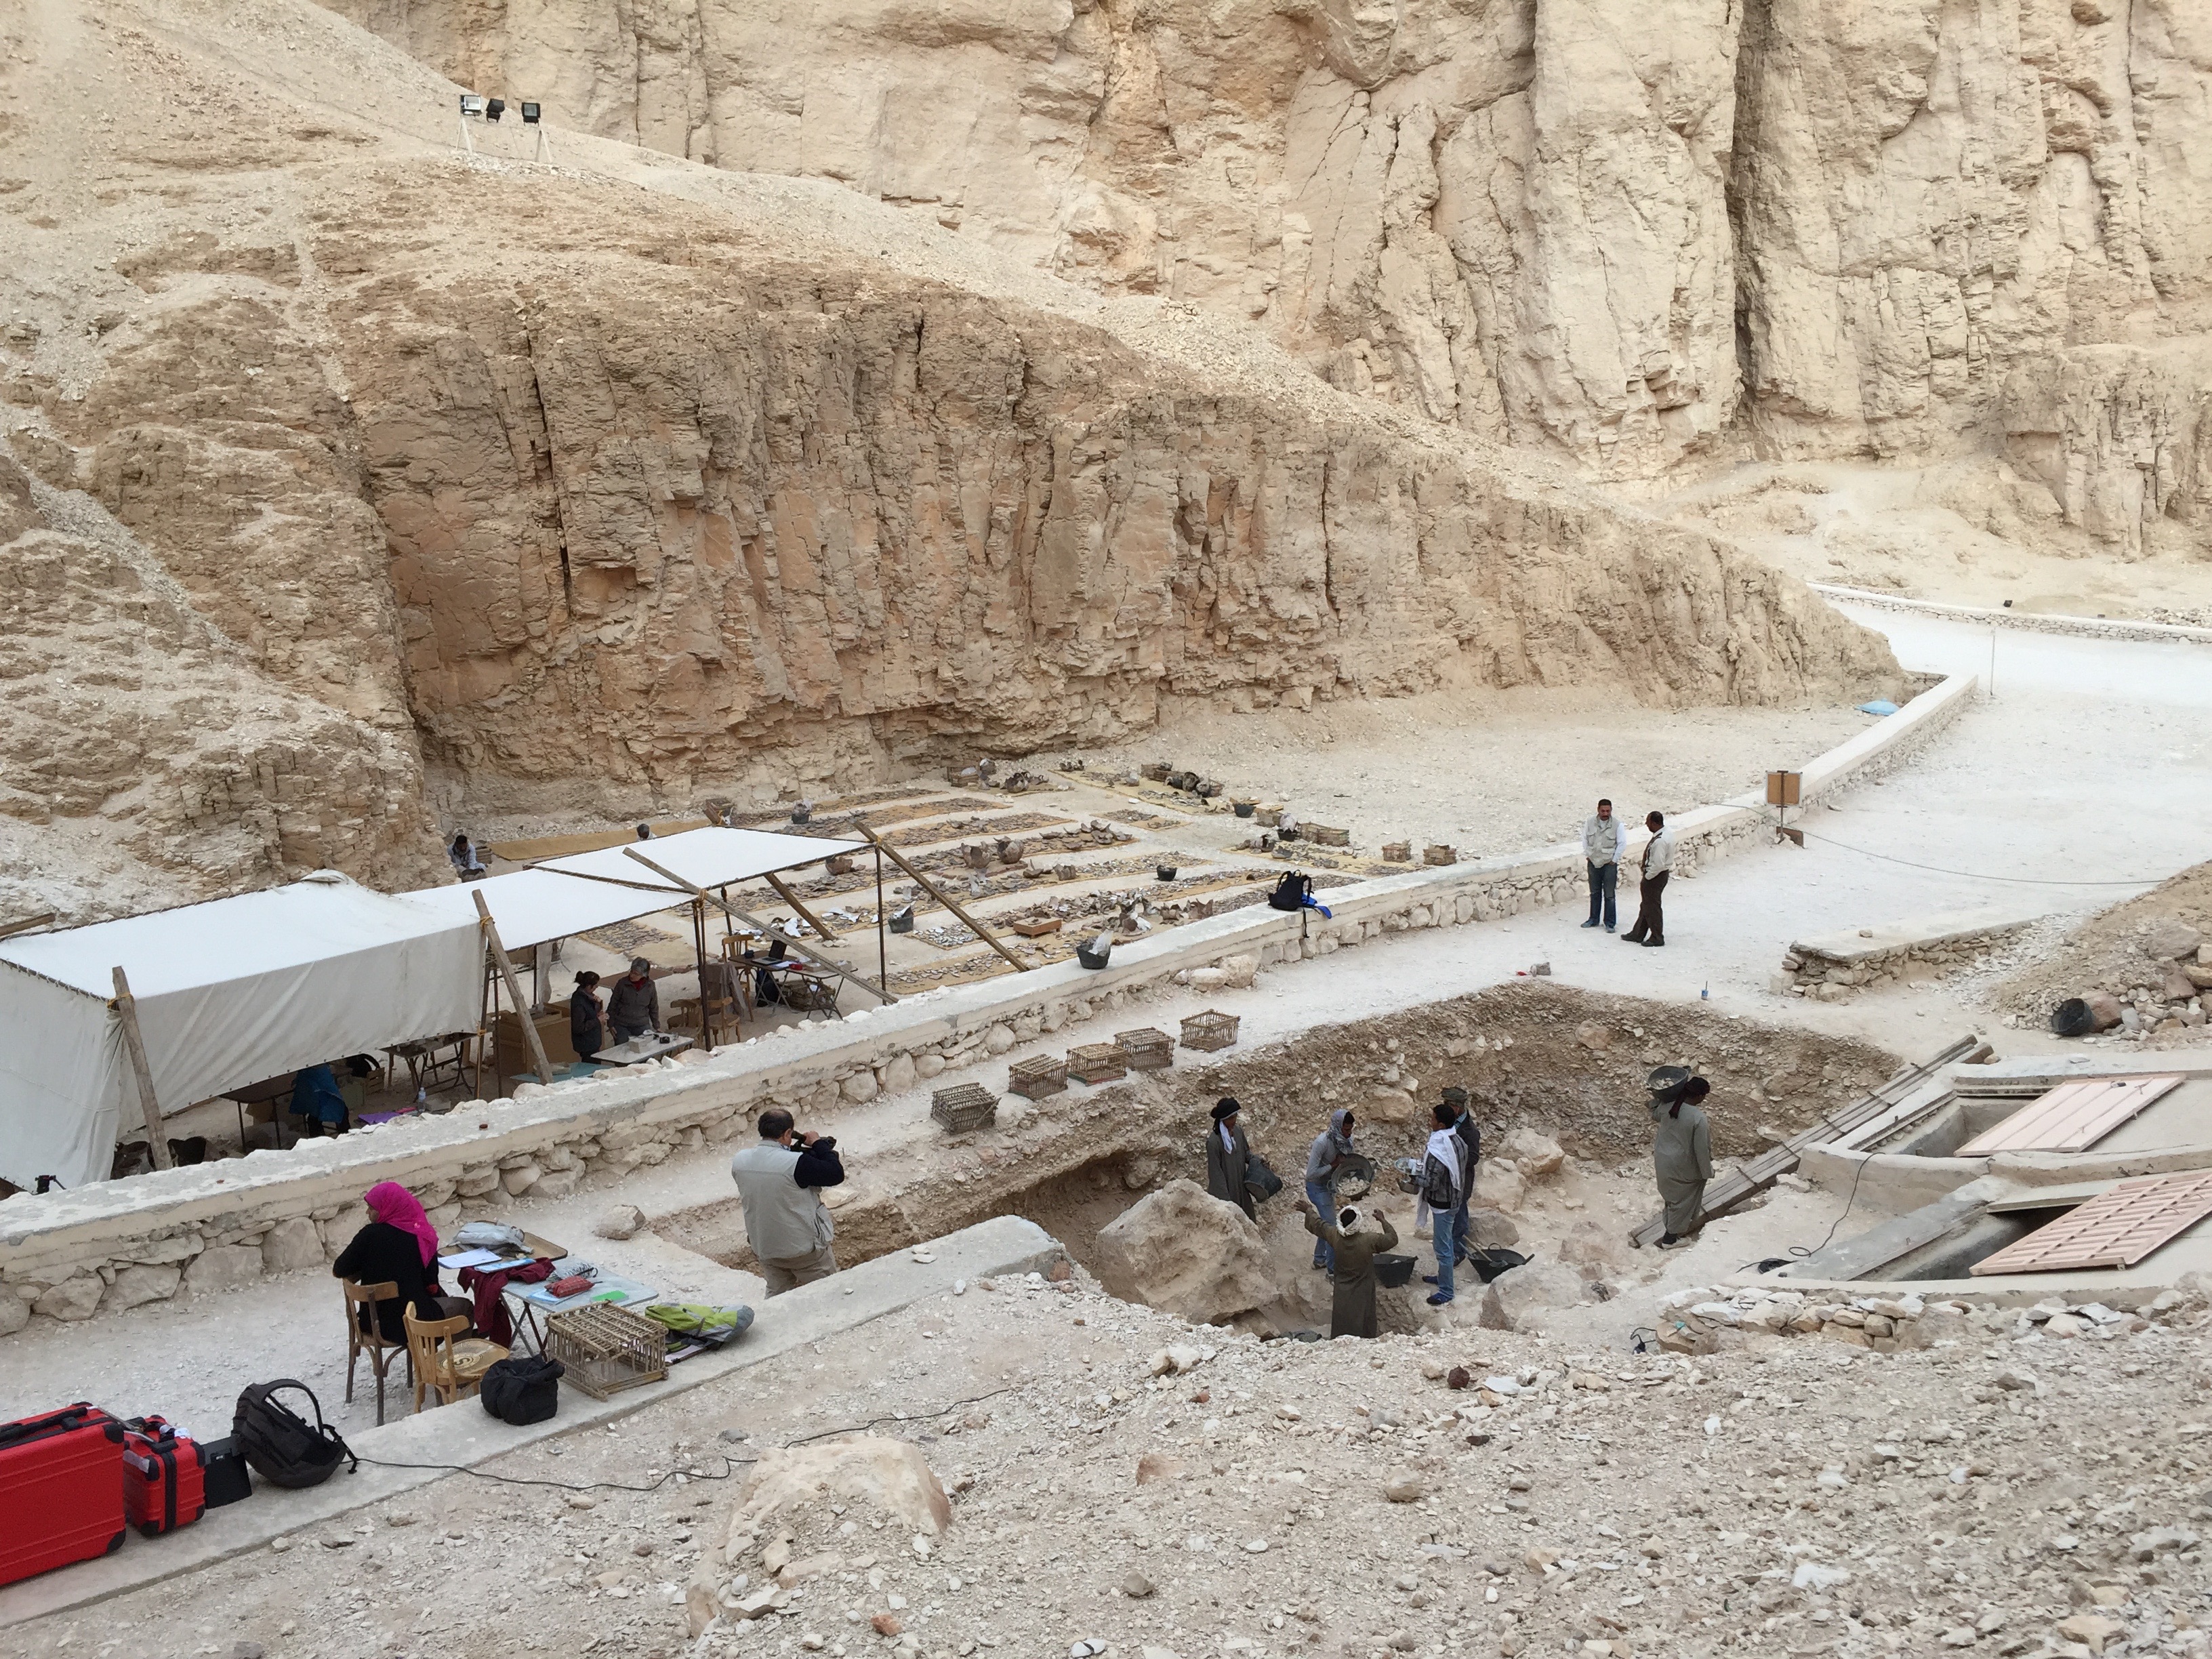 Valley of the Kings: Collaboration on the excavation mission of the University of Basel. A new grave was discovered in January 2012, the findings caused worldwide media attention in 2014